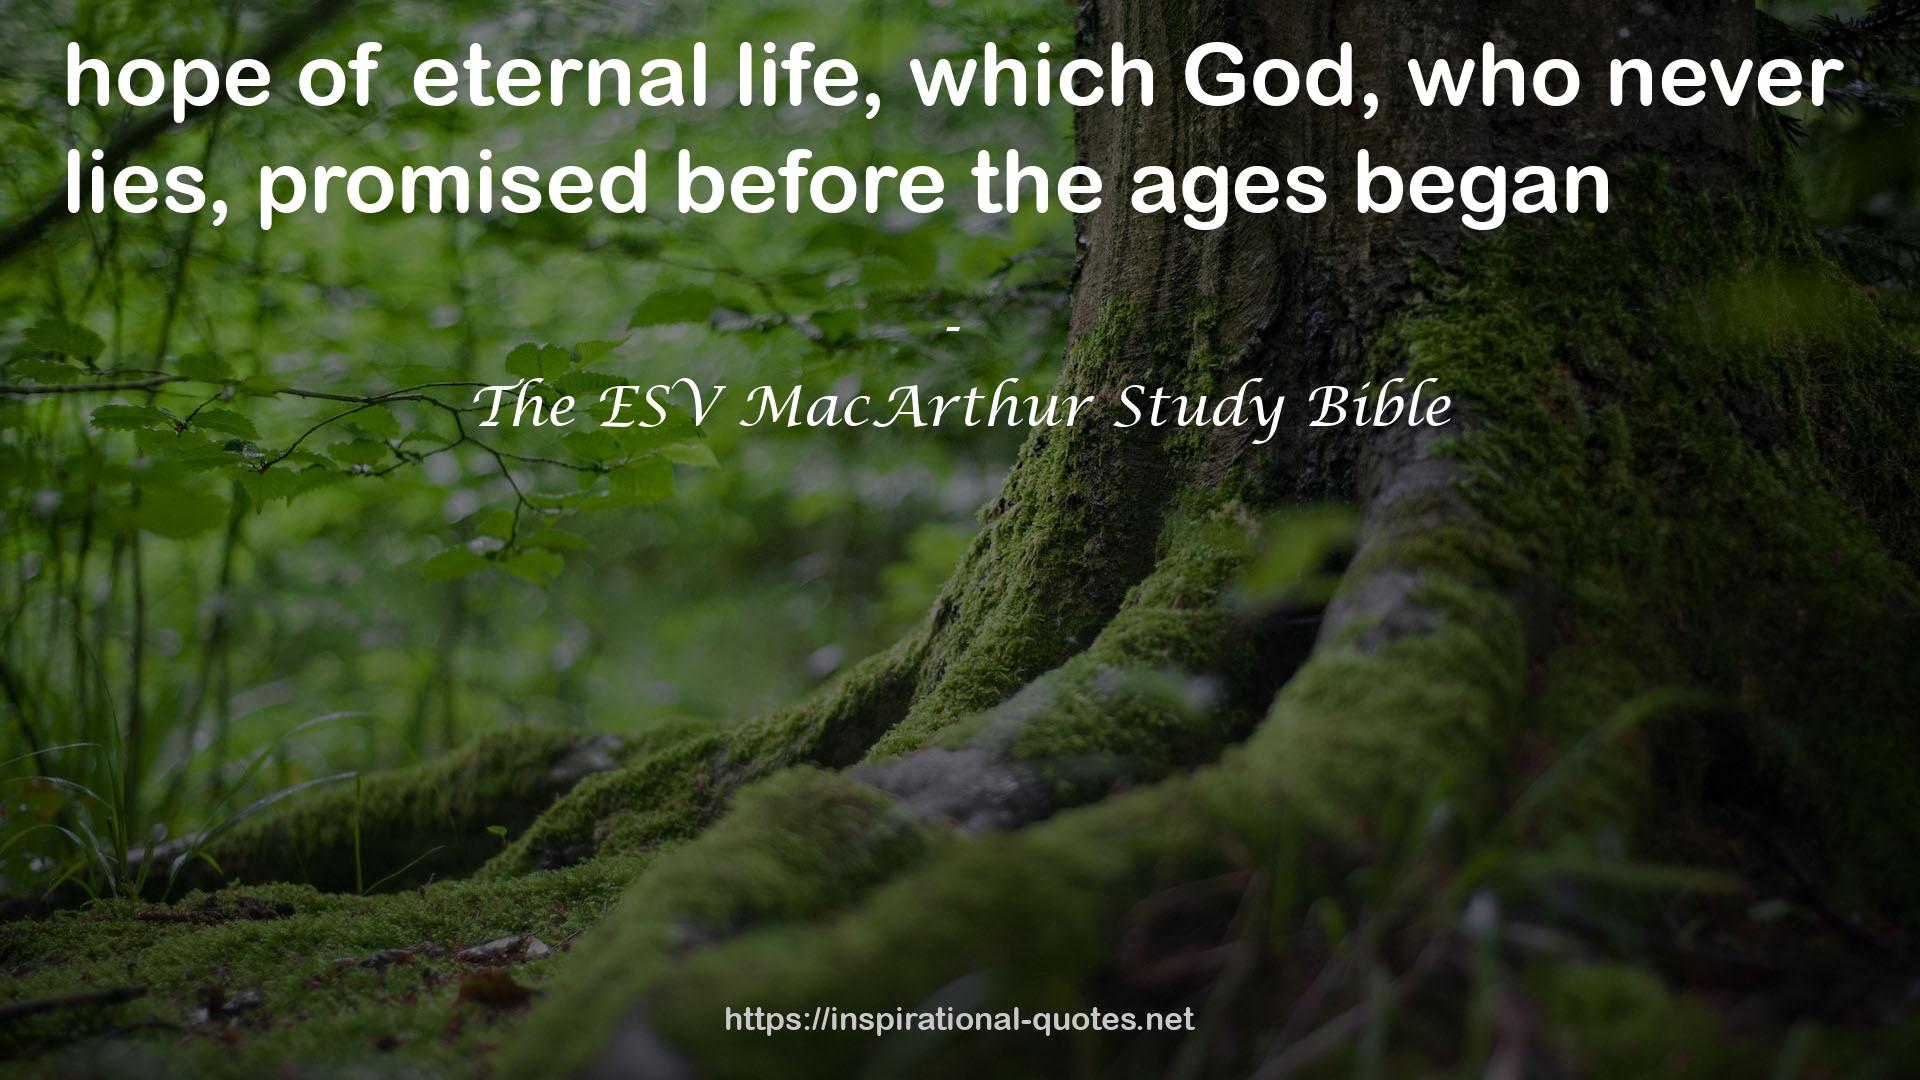 The ESV MacArthur Study Bible QUOTES